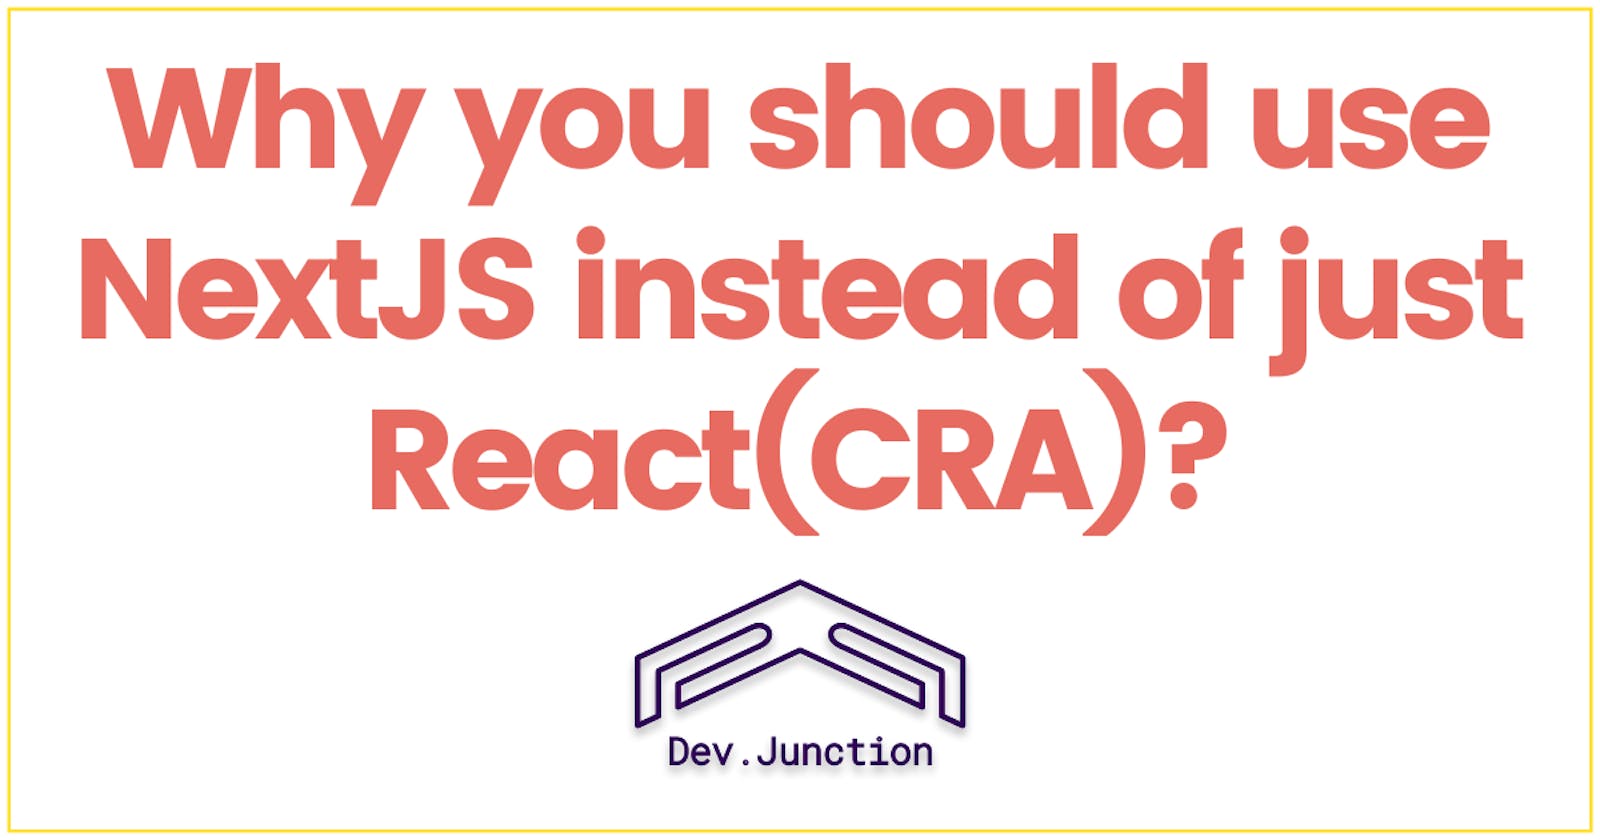 Why you should use NextJS instead of just React (Create React App)?